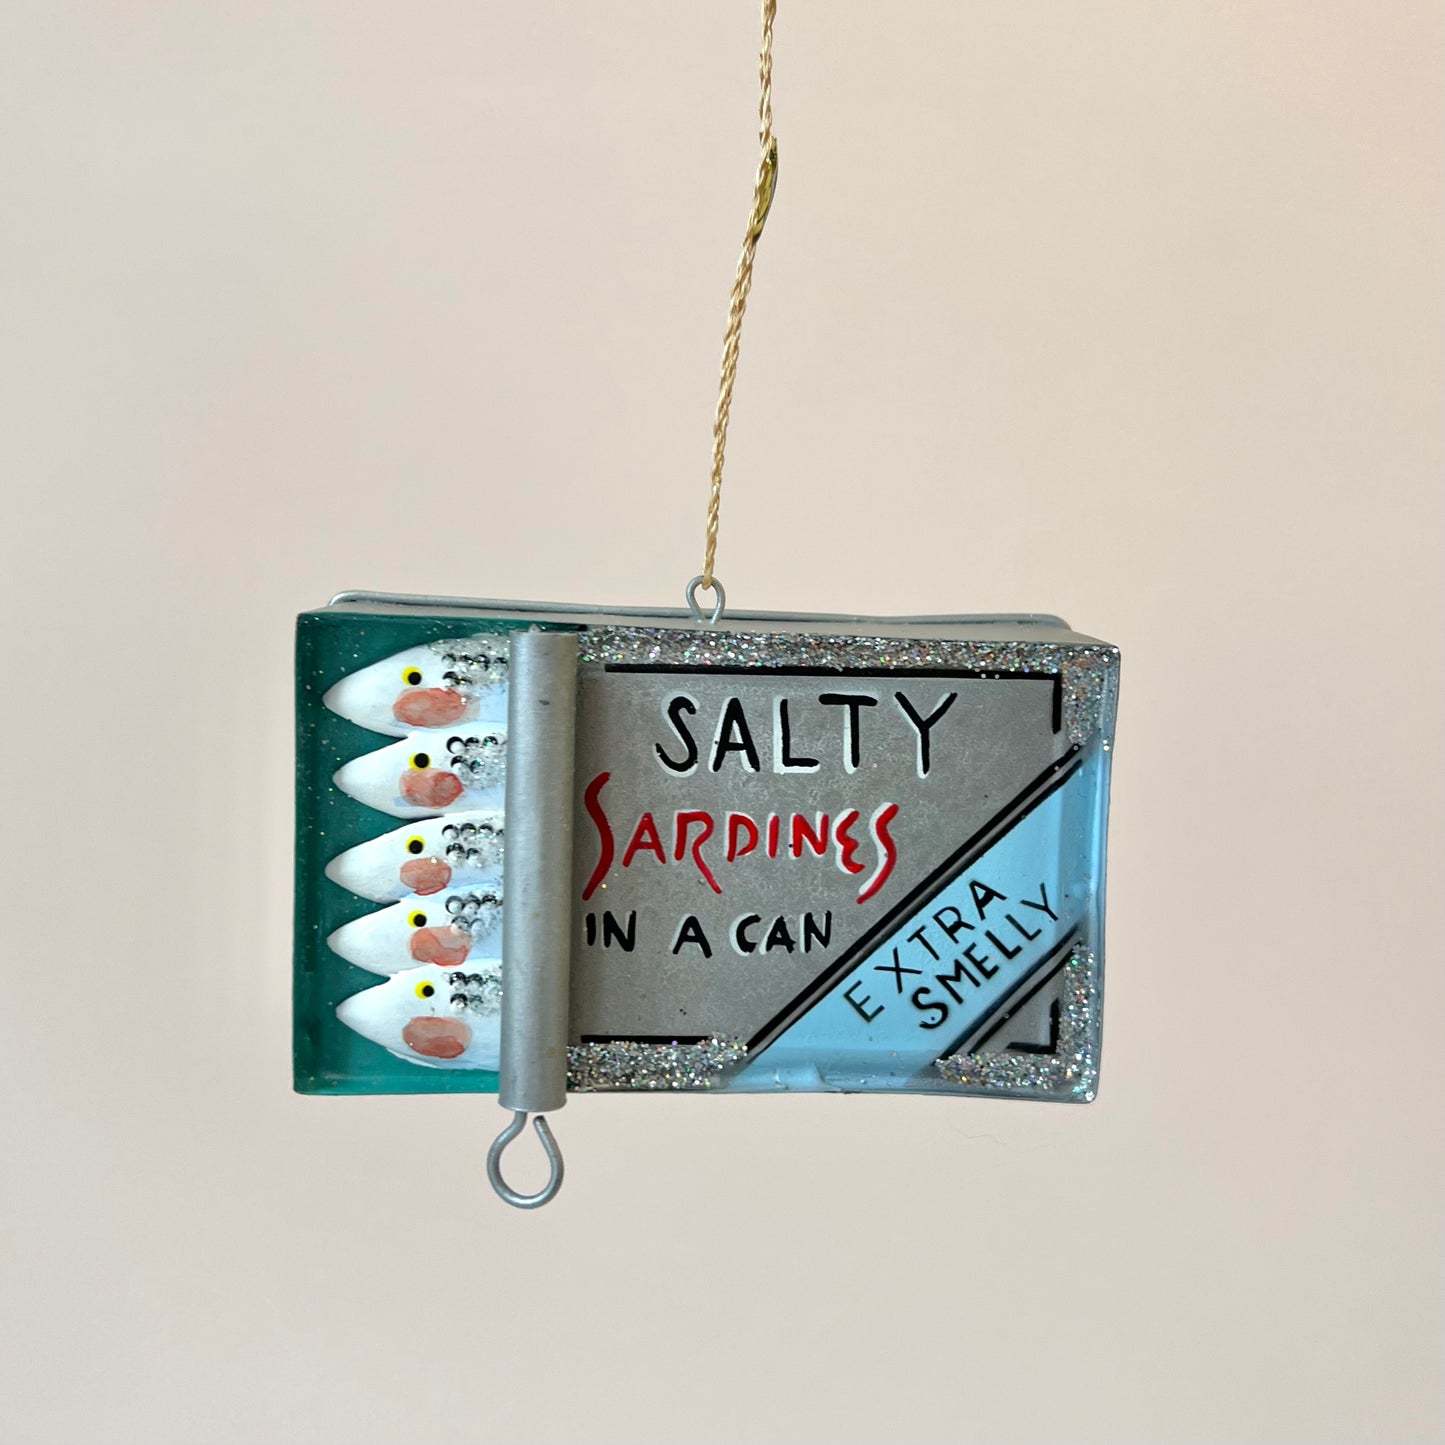 Can of Sardines Holiday Ornament